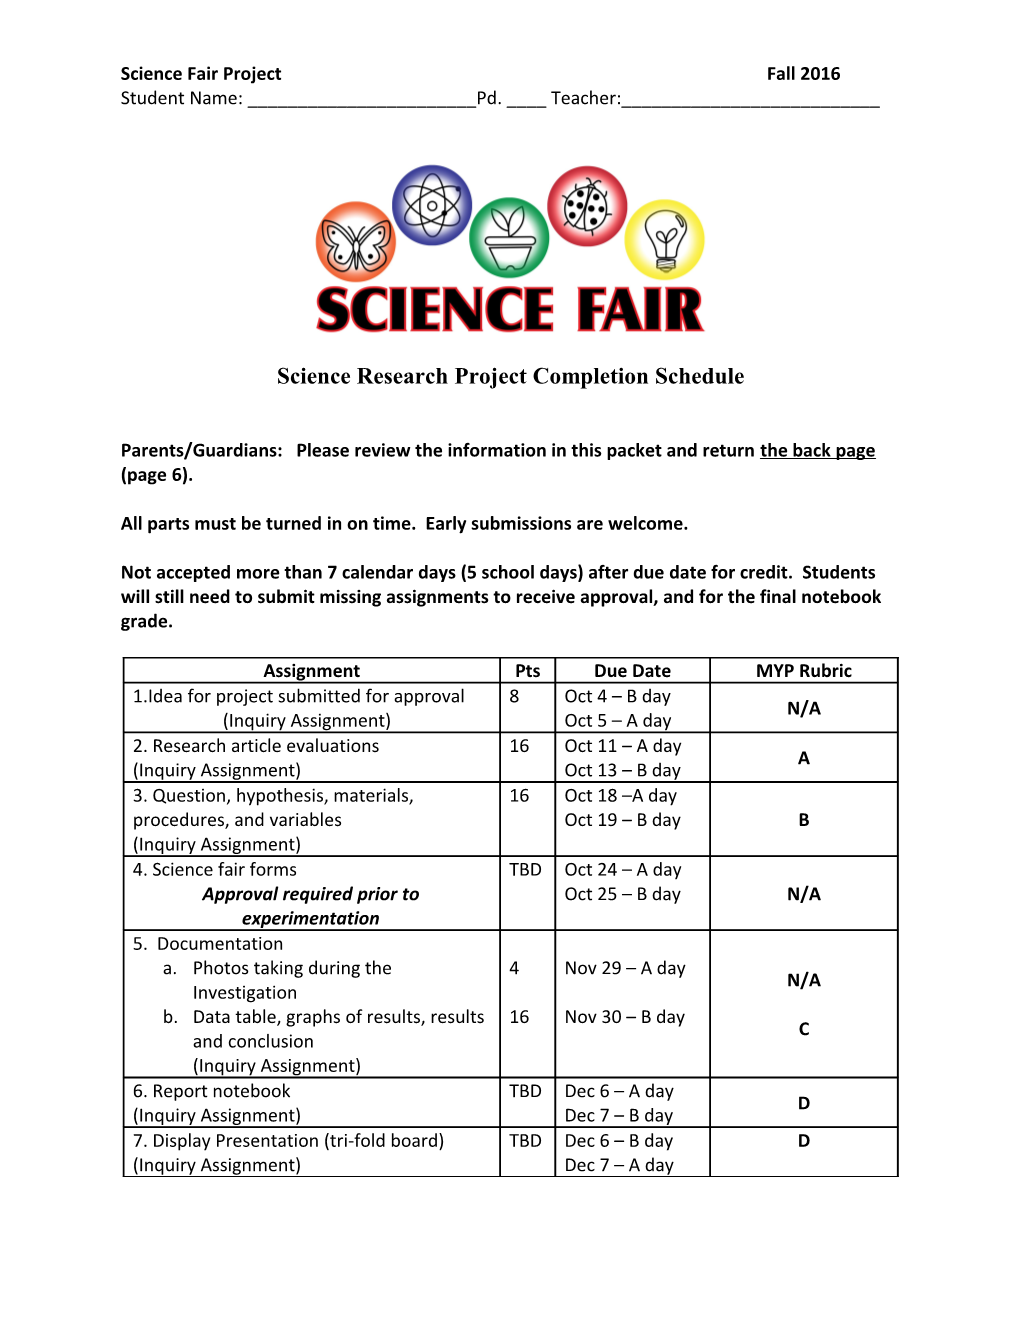 Written Research Paper for a Science Fair Project